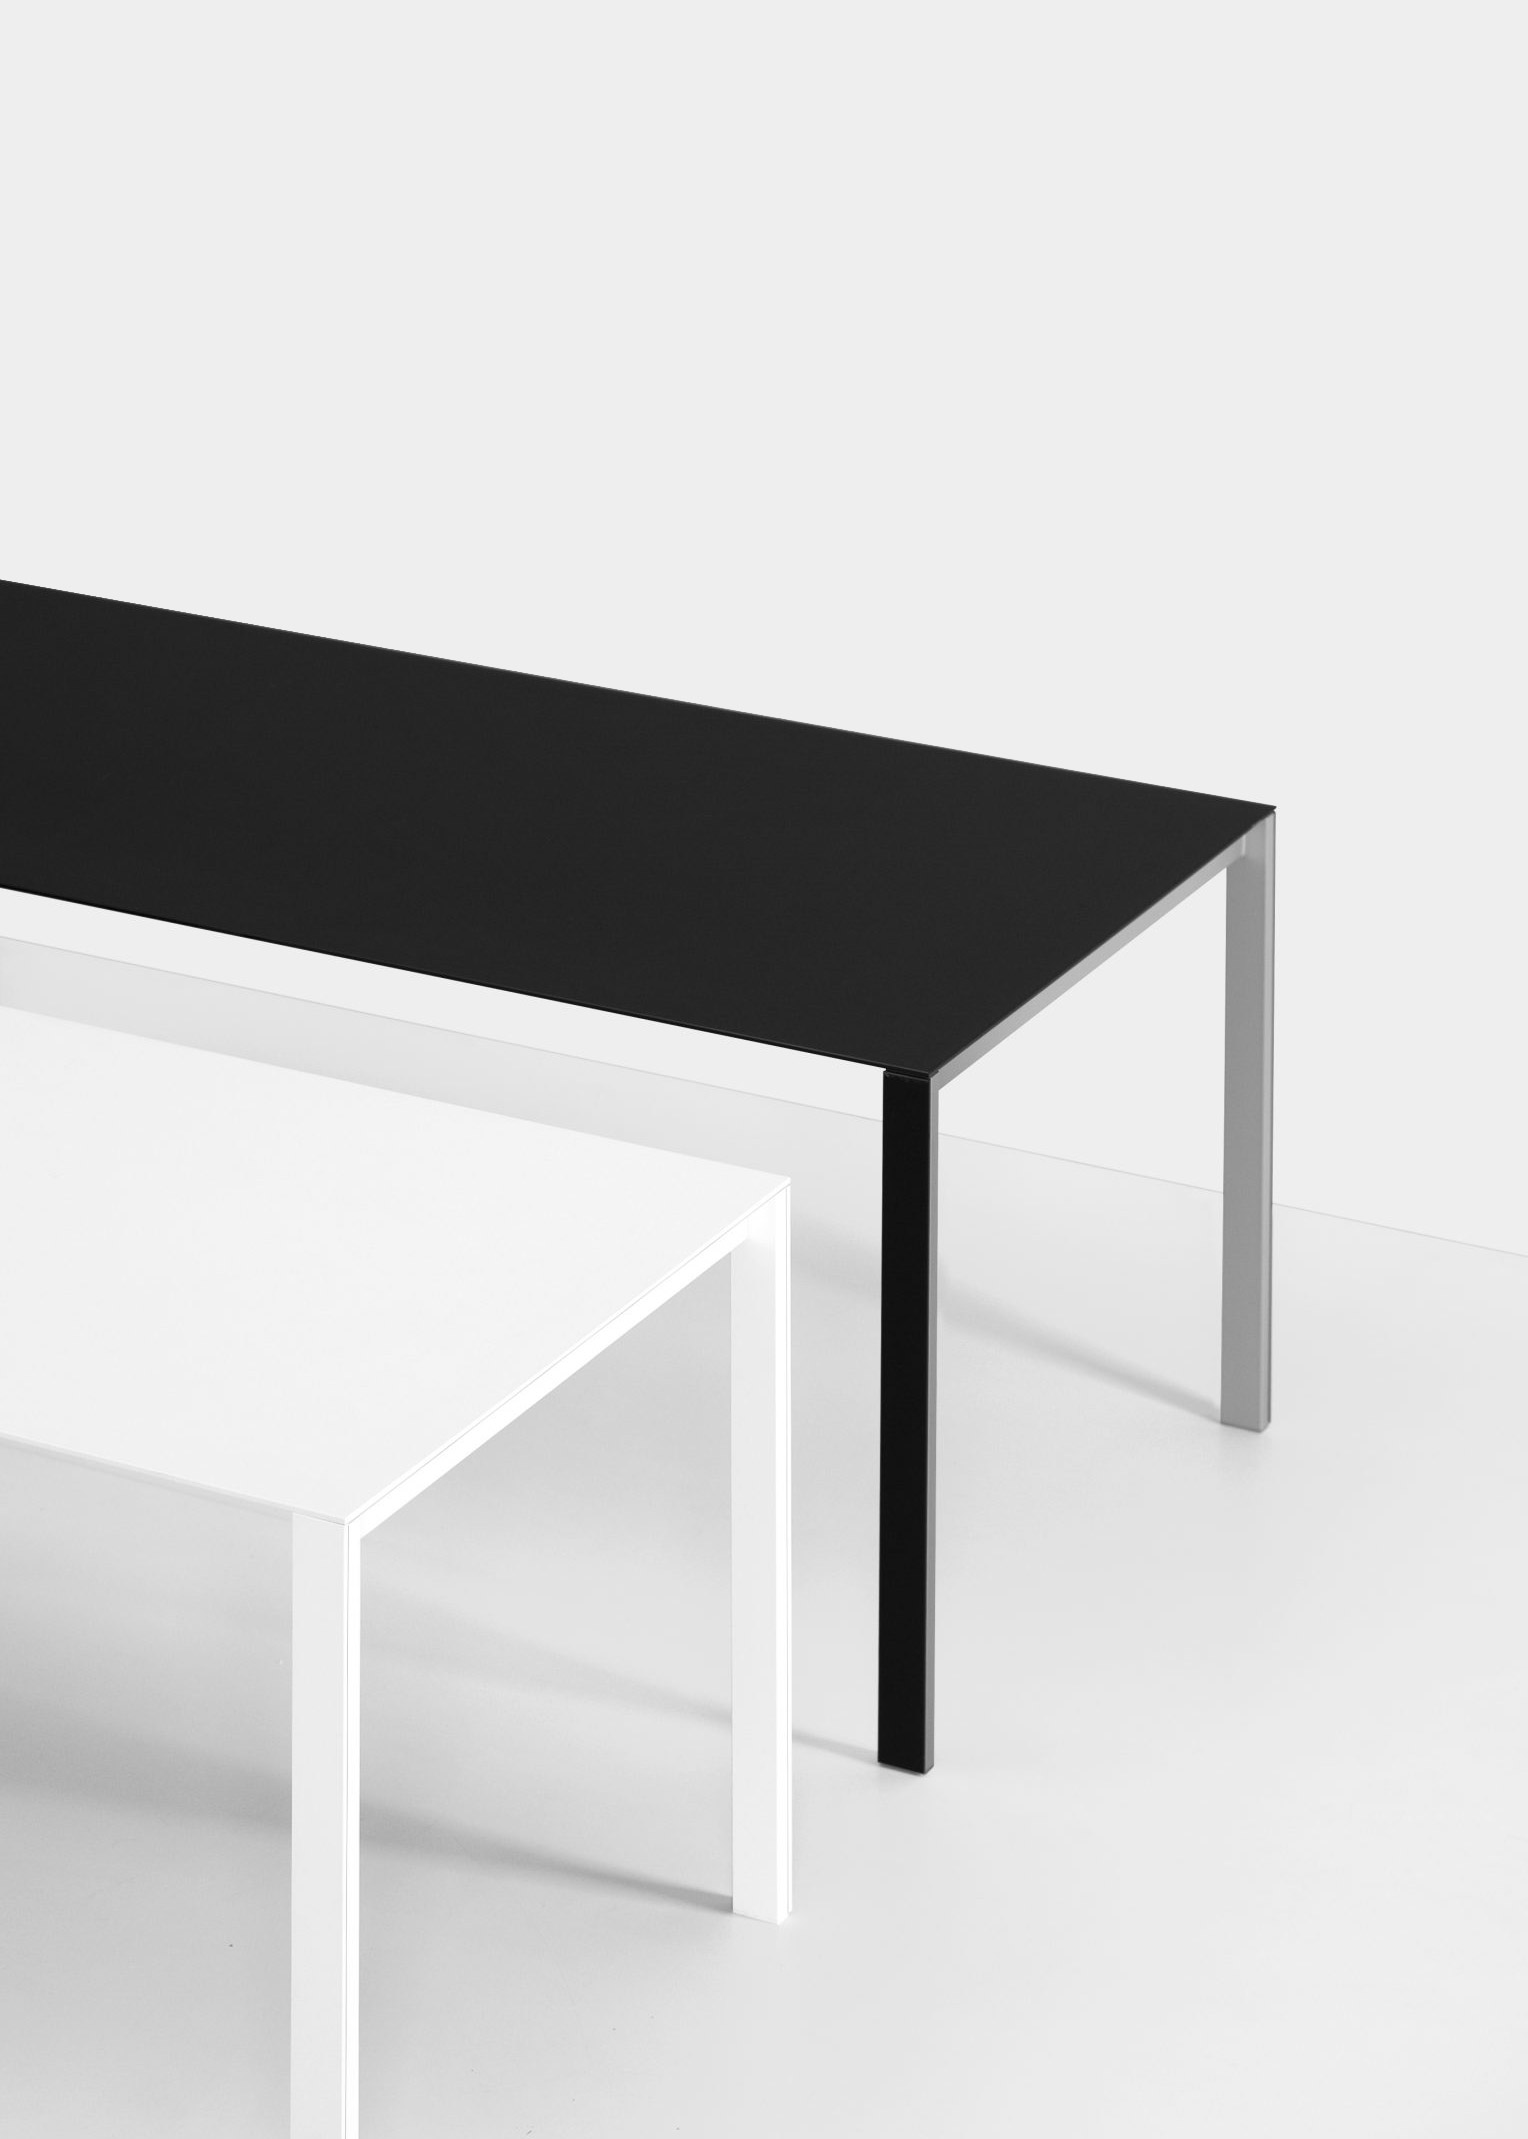 Thin-K Table by Luciano Bertoncini in White and Black